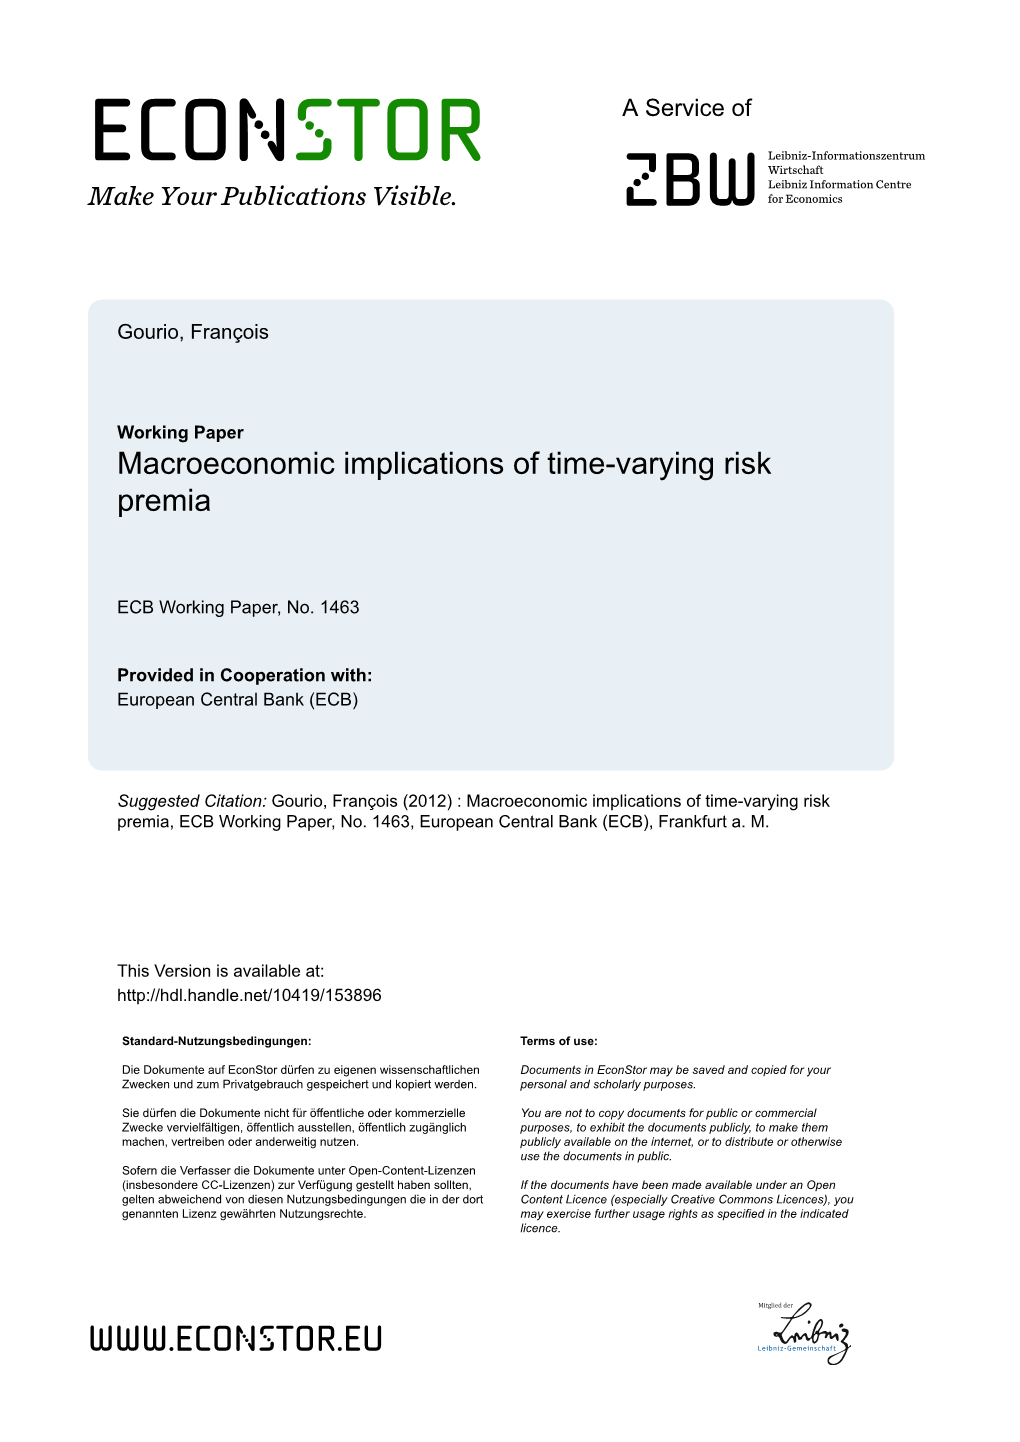 Macroeconomic Implications of Time-Varying Risk Premia